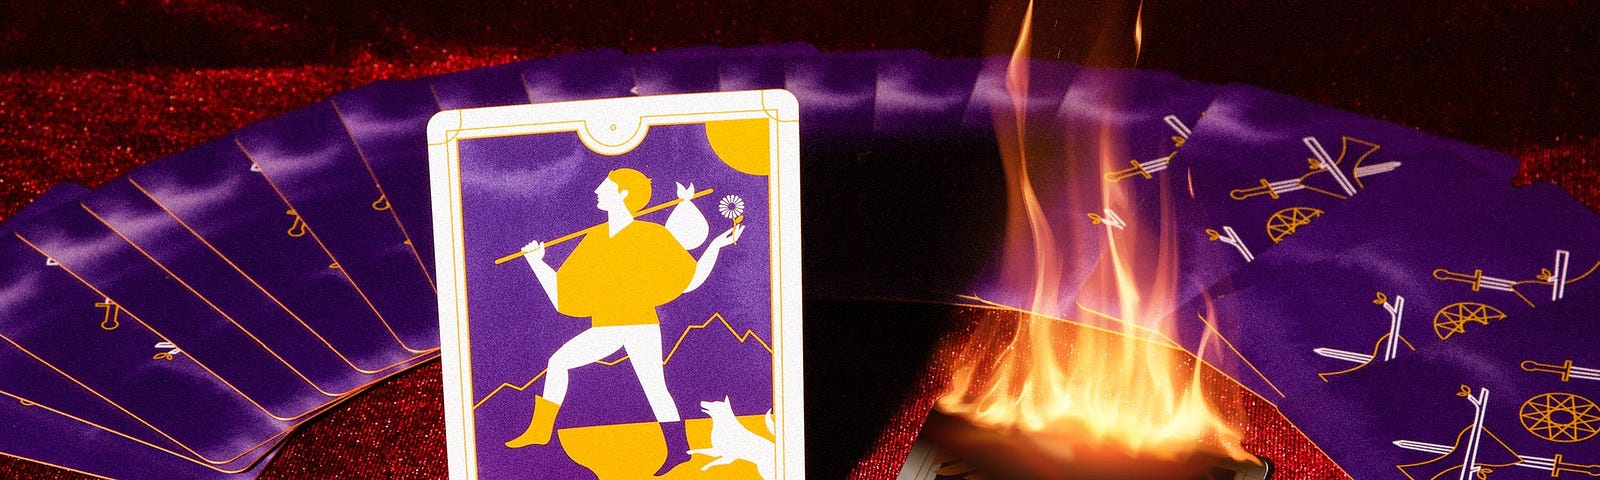 A graphic featuring tarot cards on fire.